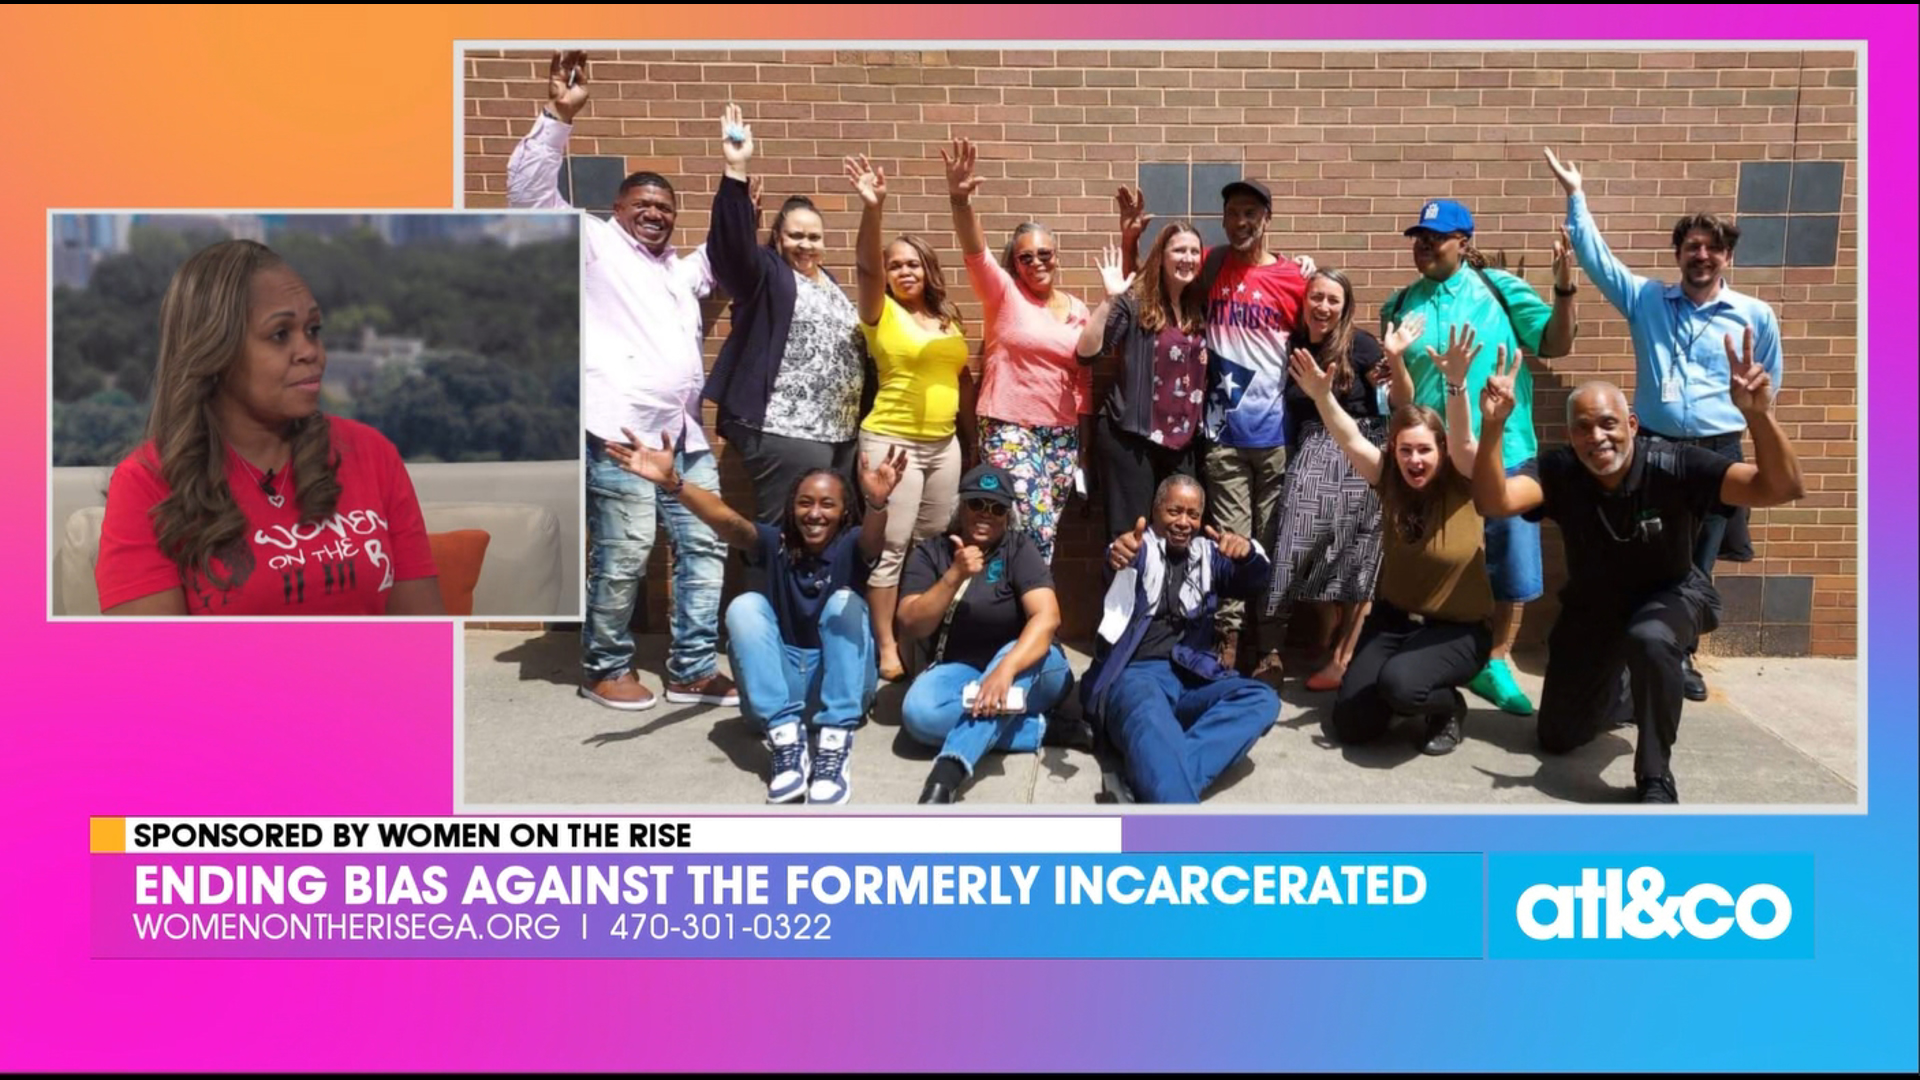 Ending bias against the formerly incarcerated. Women on the Rise is building the power of these women in metro Atlanta to re-enter society healthy and whole.